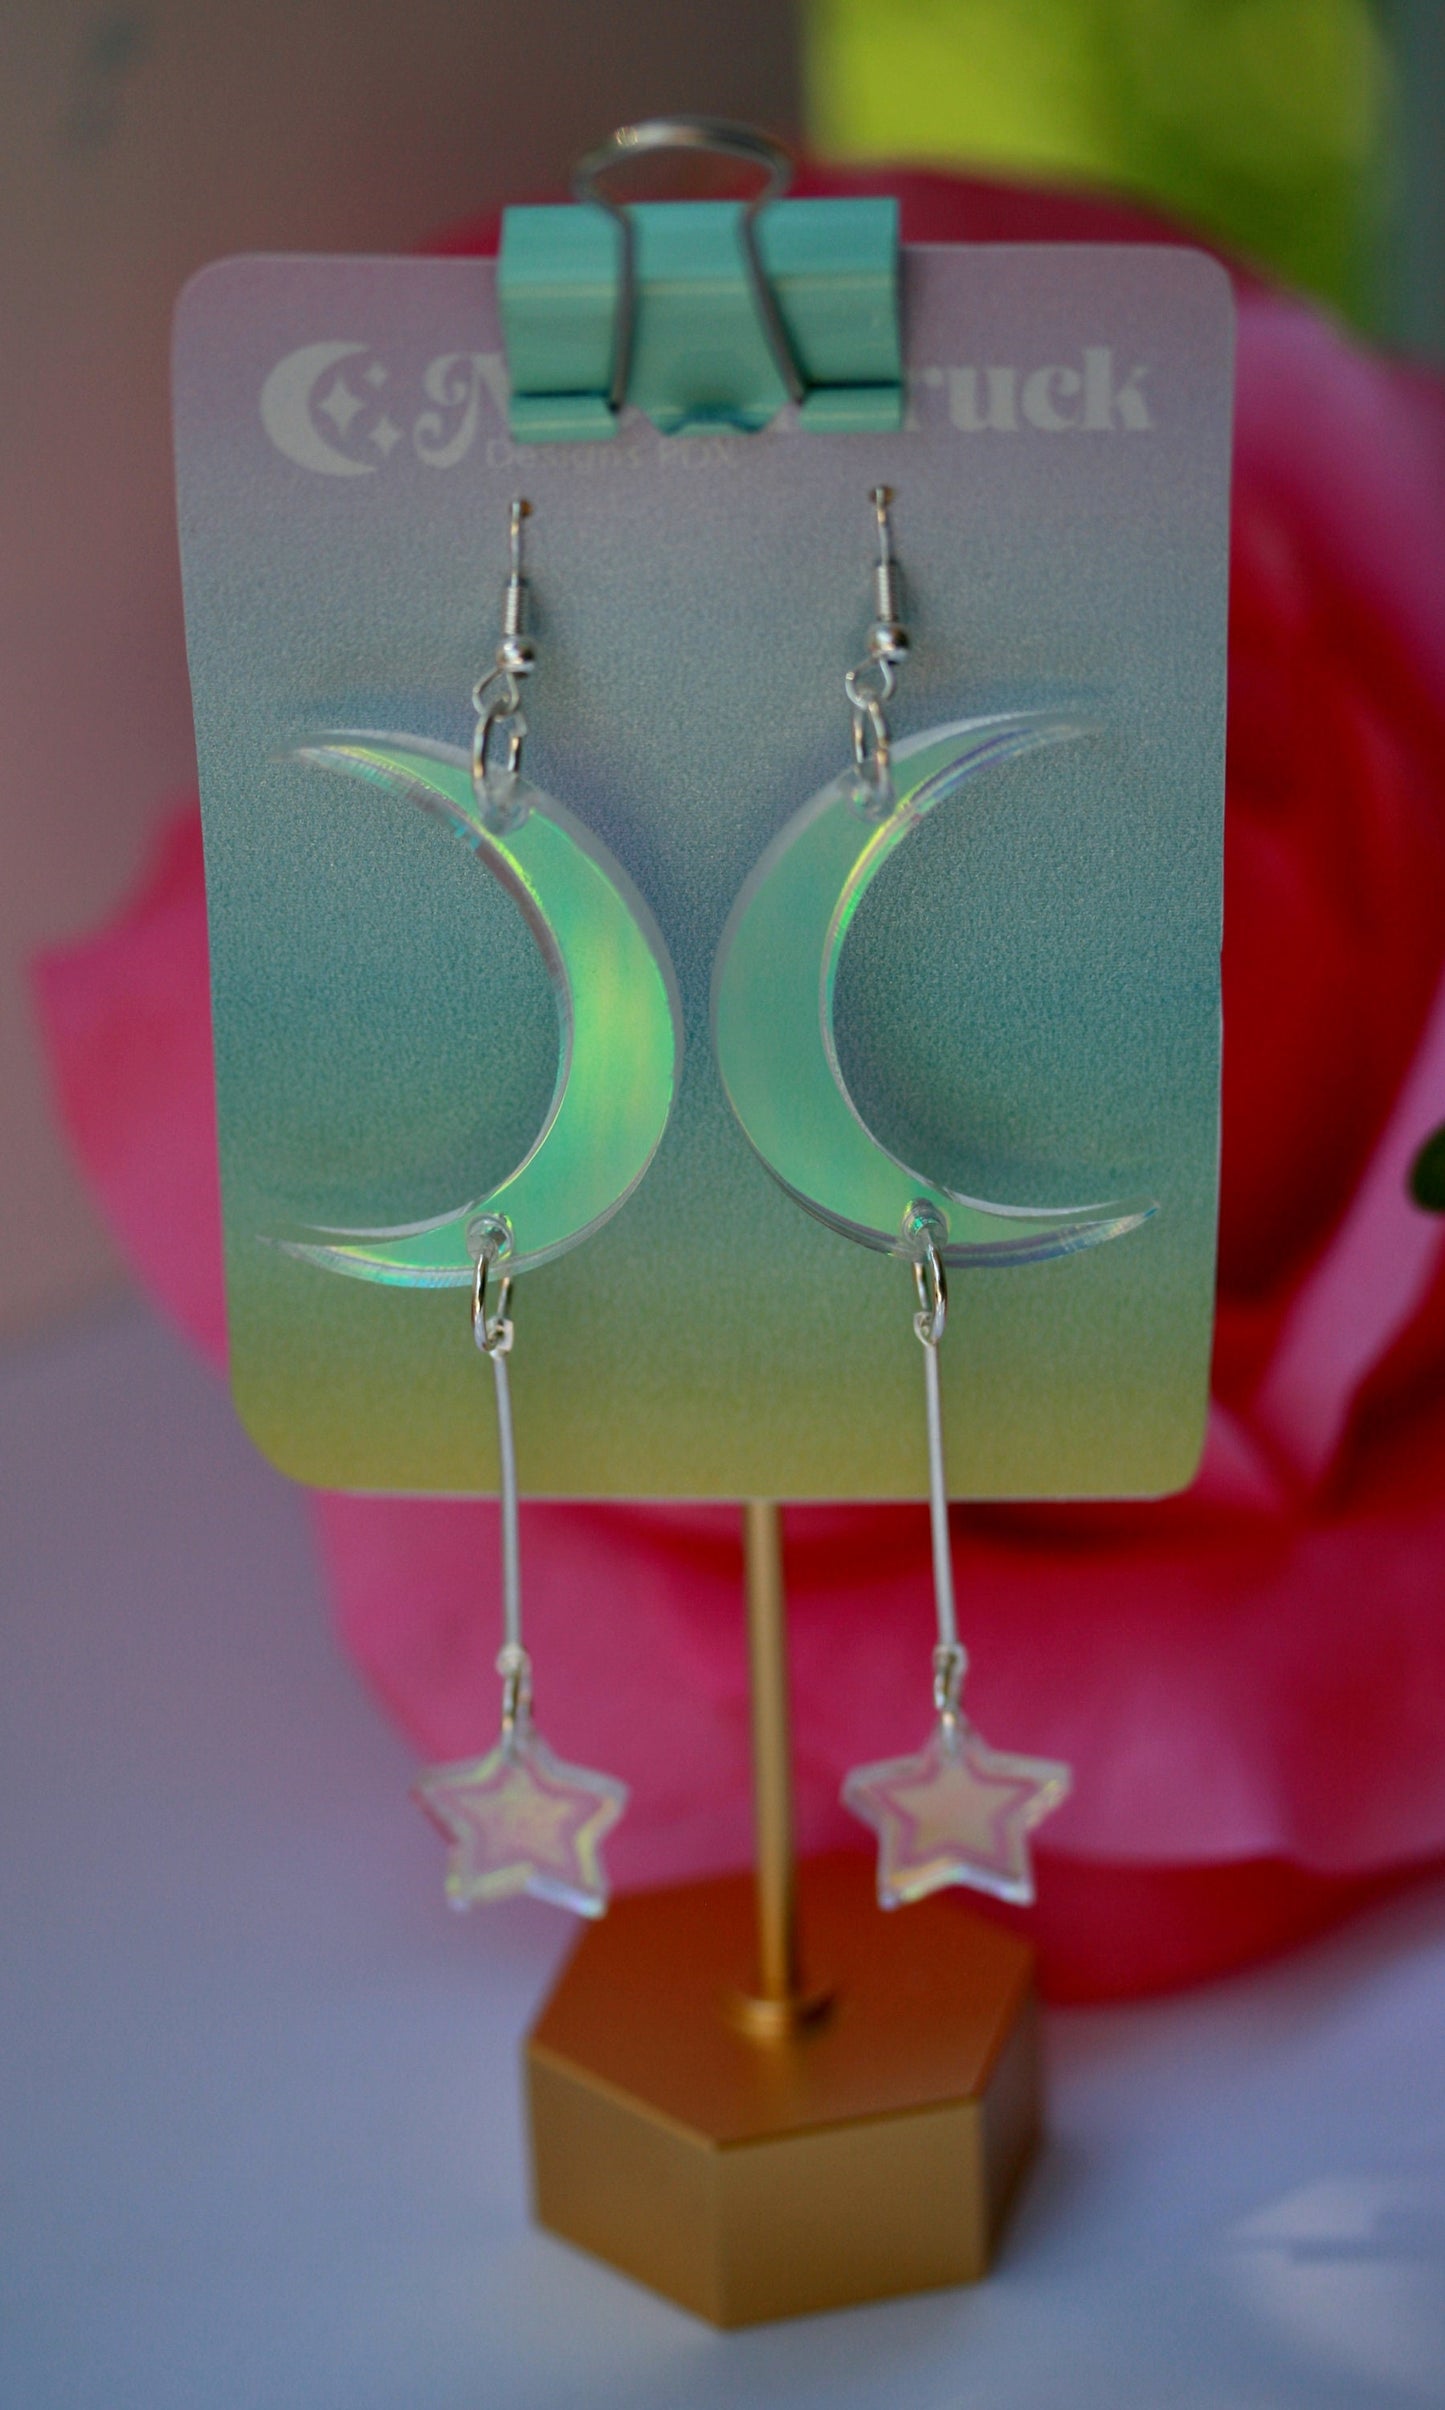 Crescent Moon Earrings- Luna Lunar Celestial Star Weather Planet Wiccan Witchy Goth Cosmic Lasercut Iridescent Reflective Rainbow Dangle